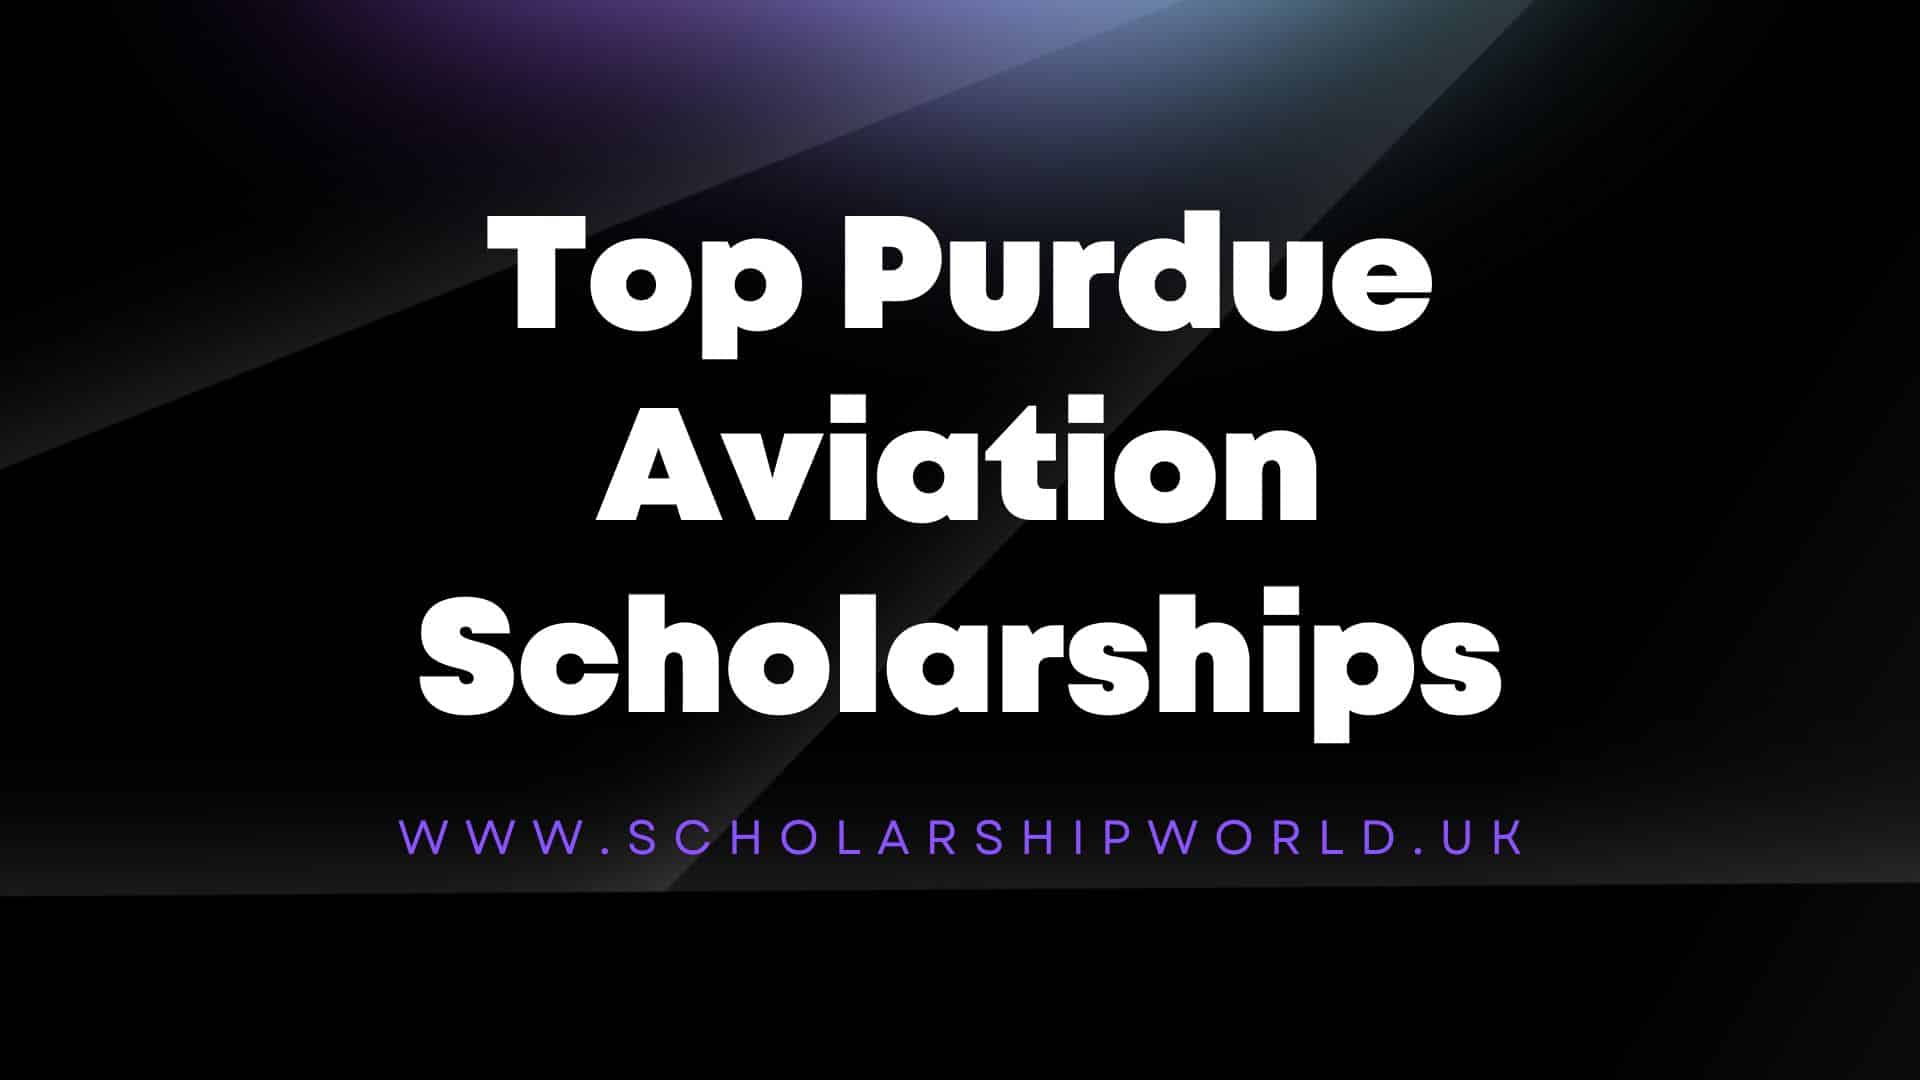 Apply Now: Top Purdue Aviation Scholarships in 2022